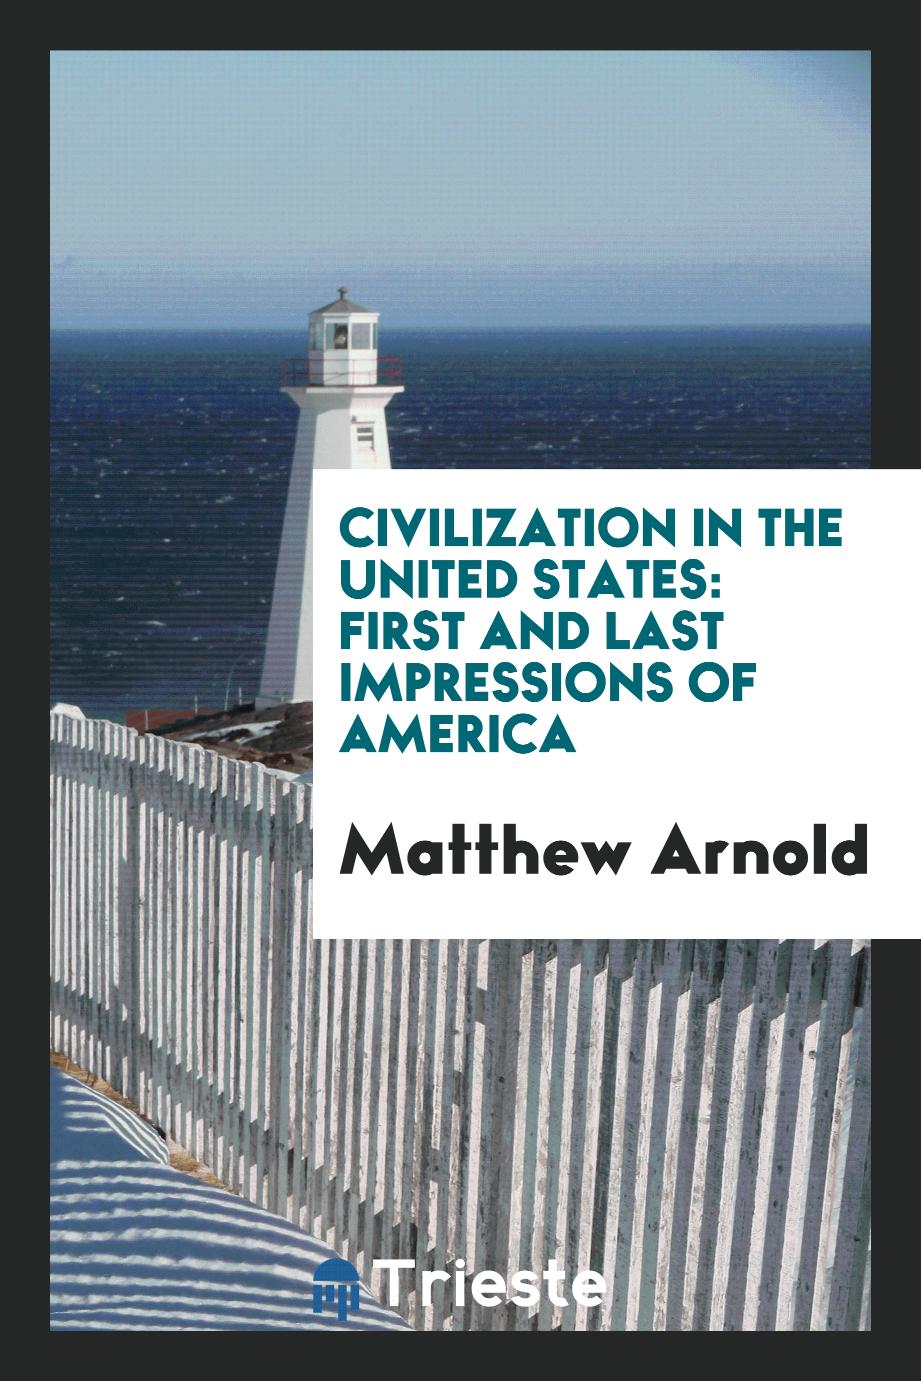 Civilization in the United States: First and Last Impressions of America